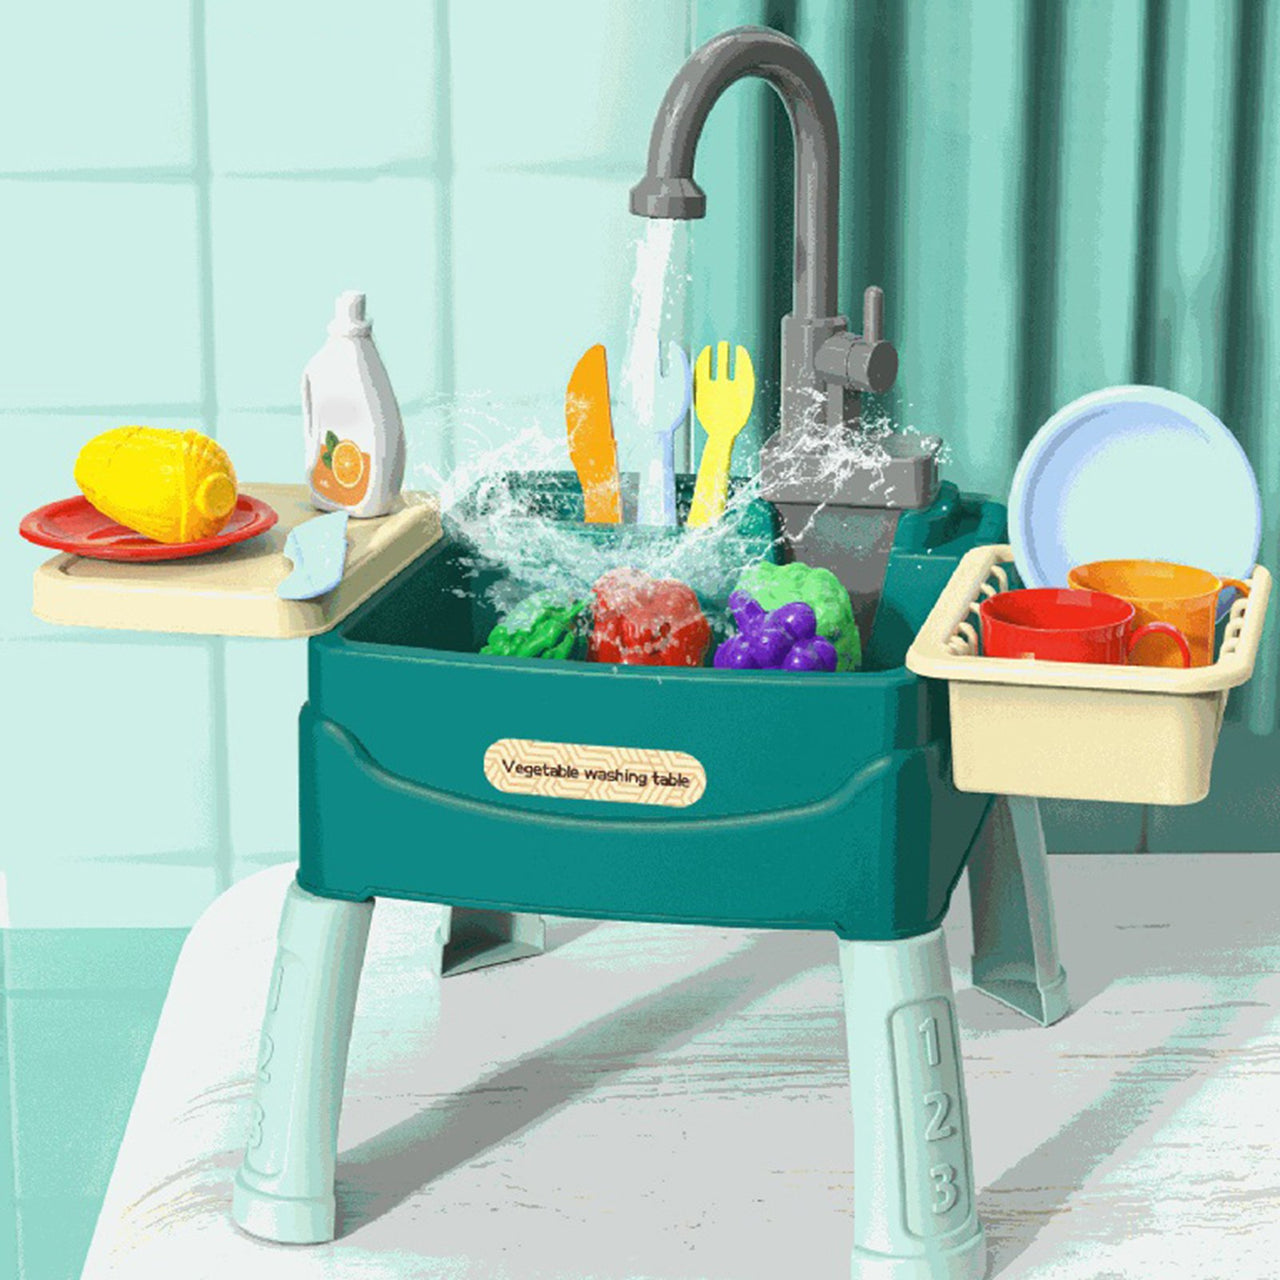 23Pcs Washing Vegetables Play Sink Table